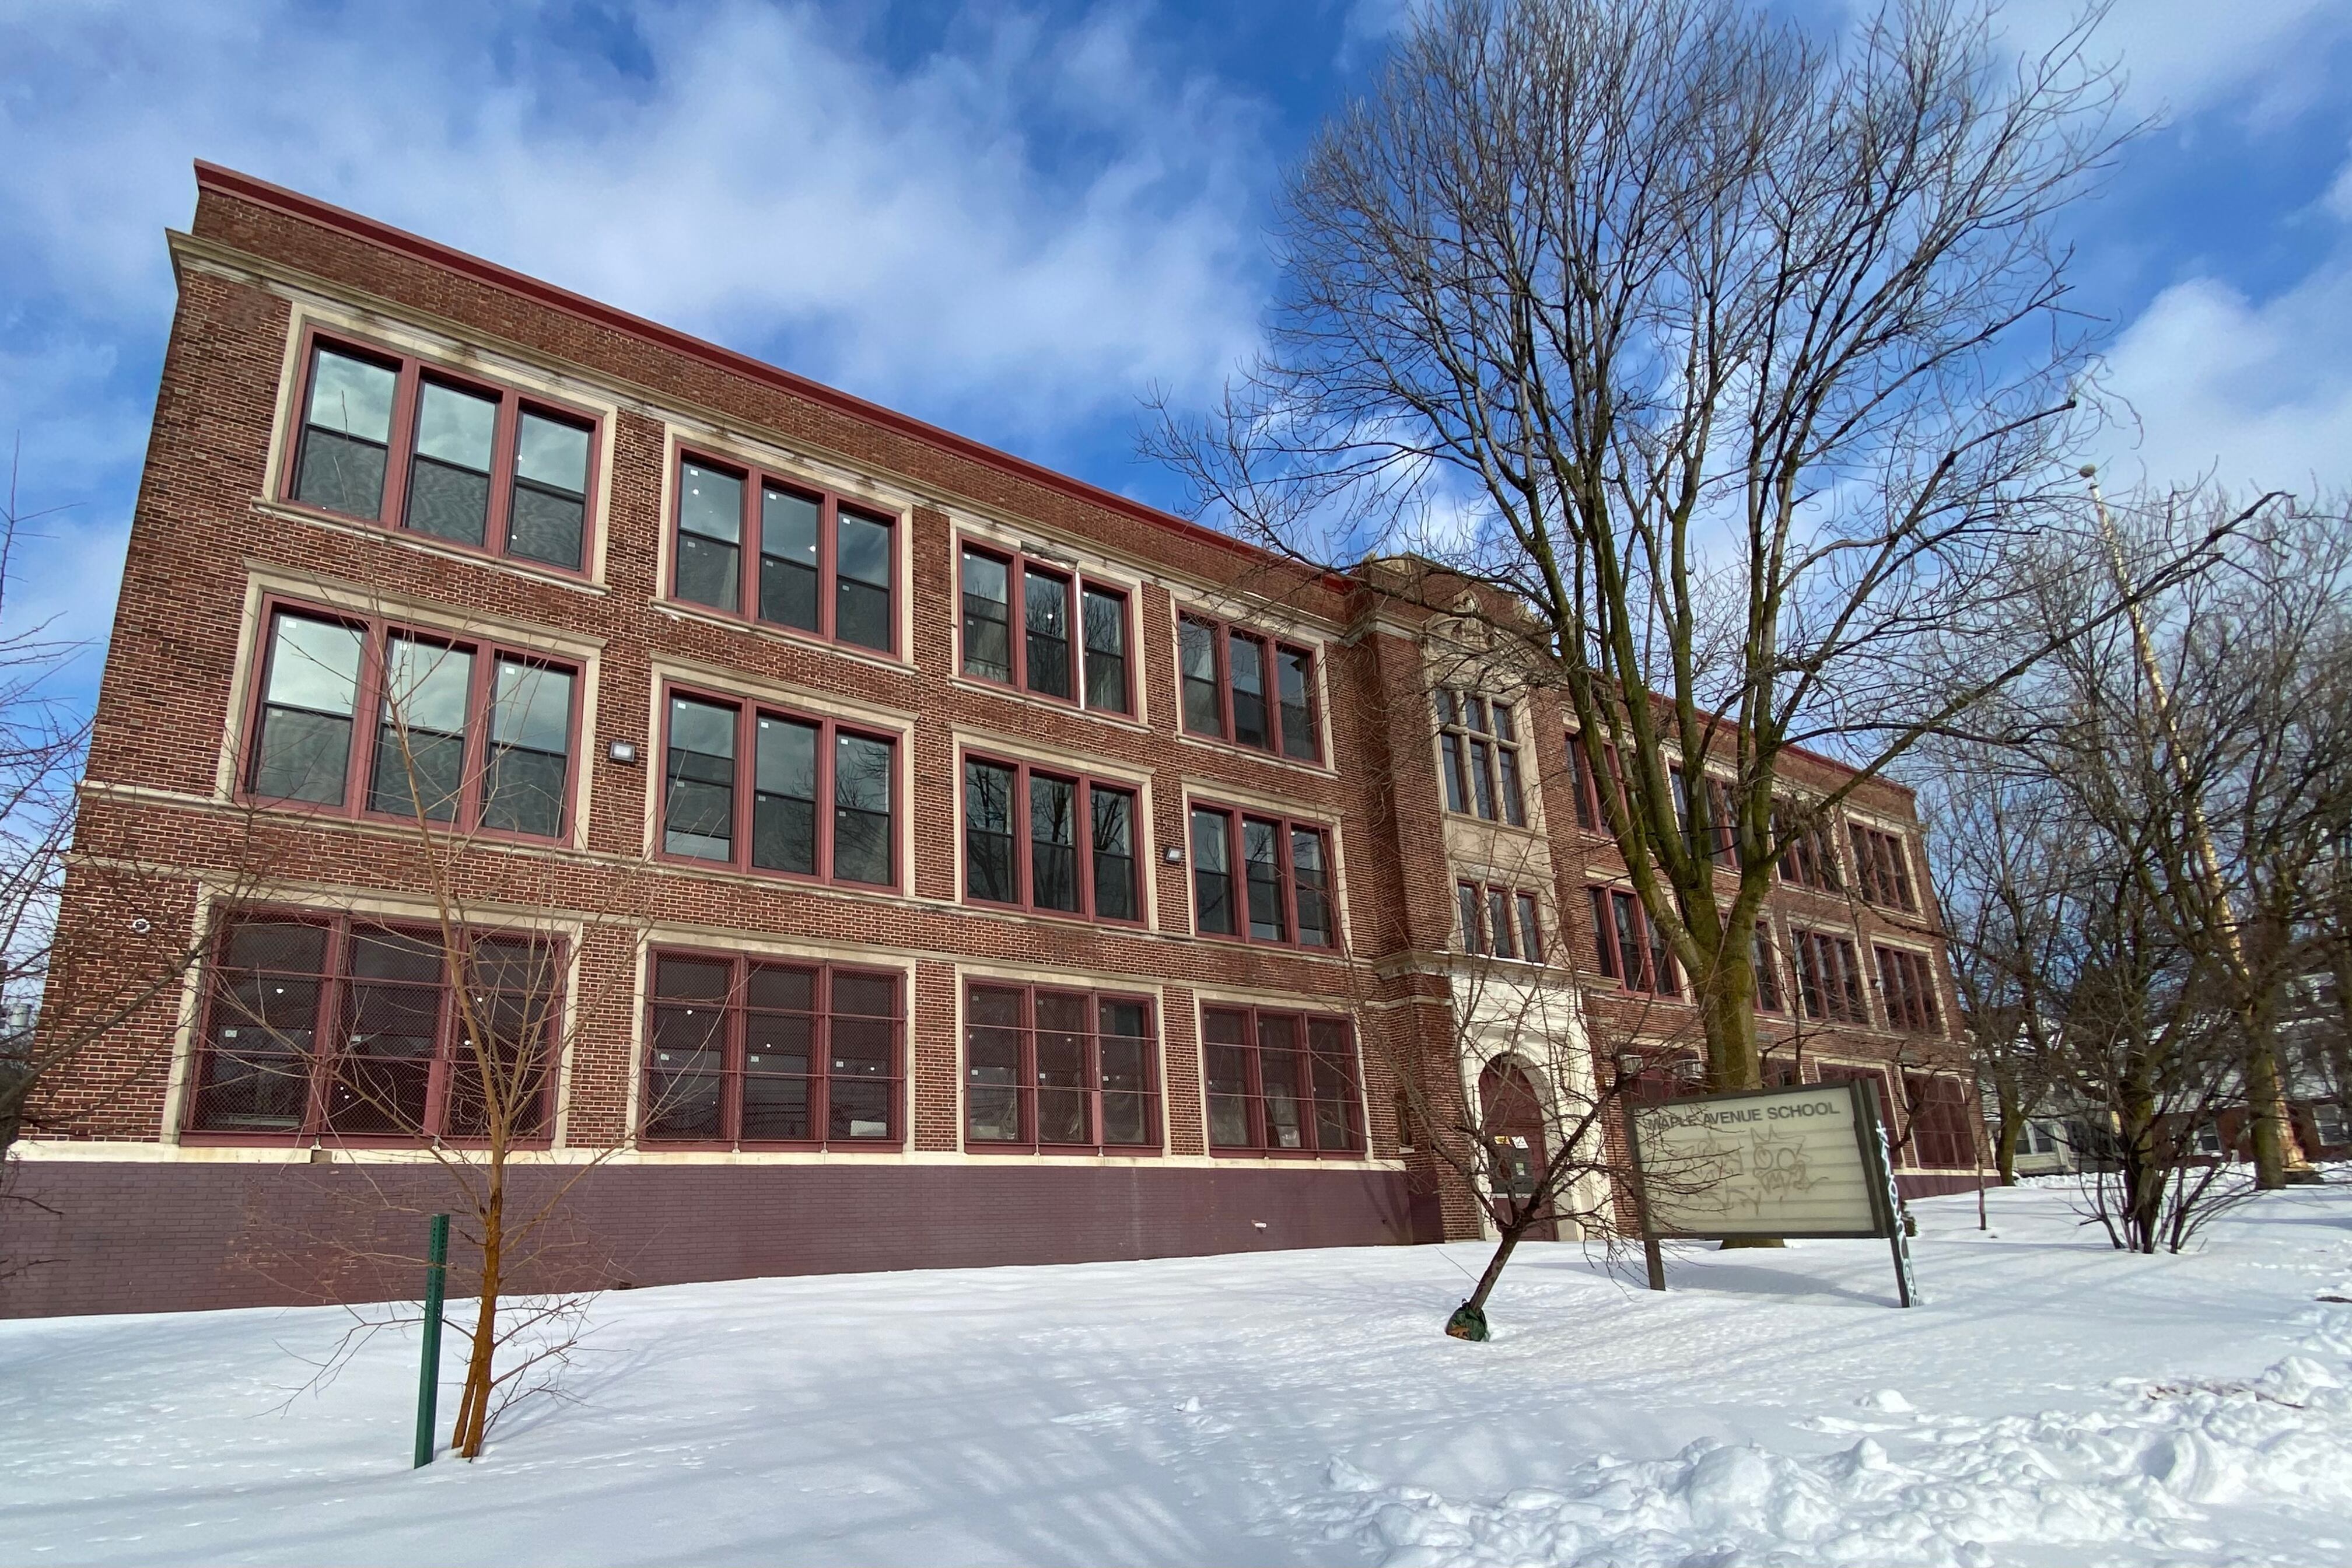 A large stone school building surrounded by snow and a blue sky and clouds in the background.